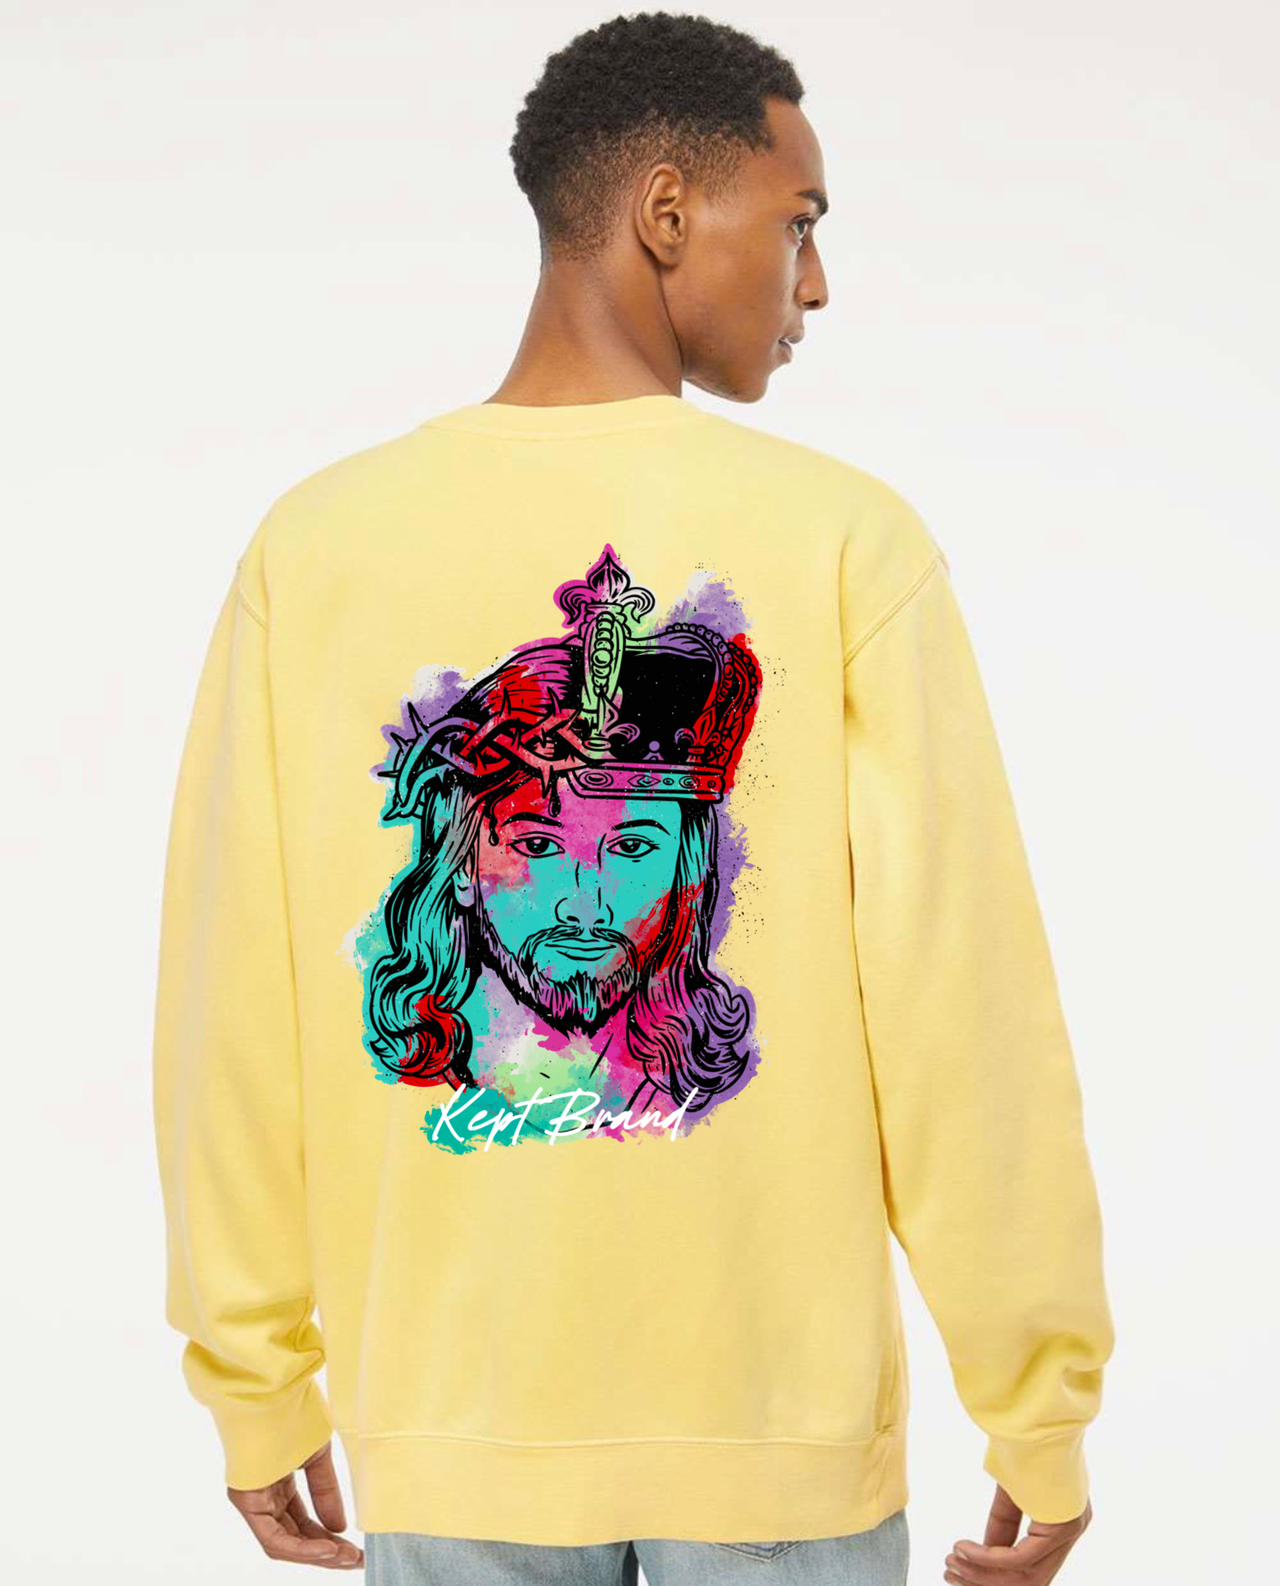 A man wearing a yellow sweatshirt with an image of Christ on it.